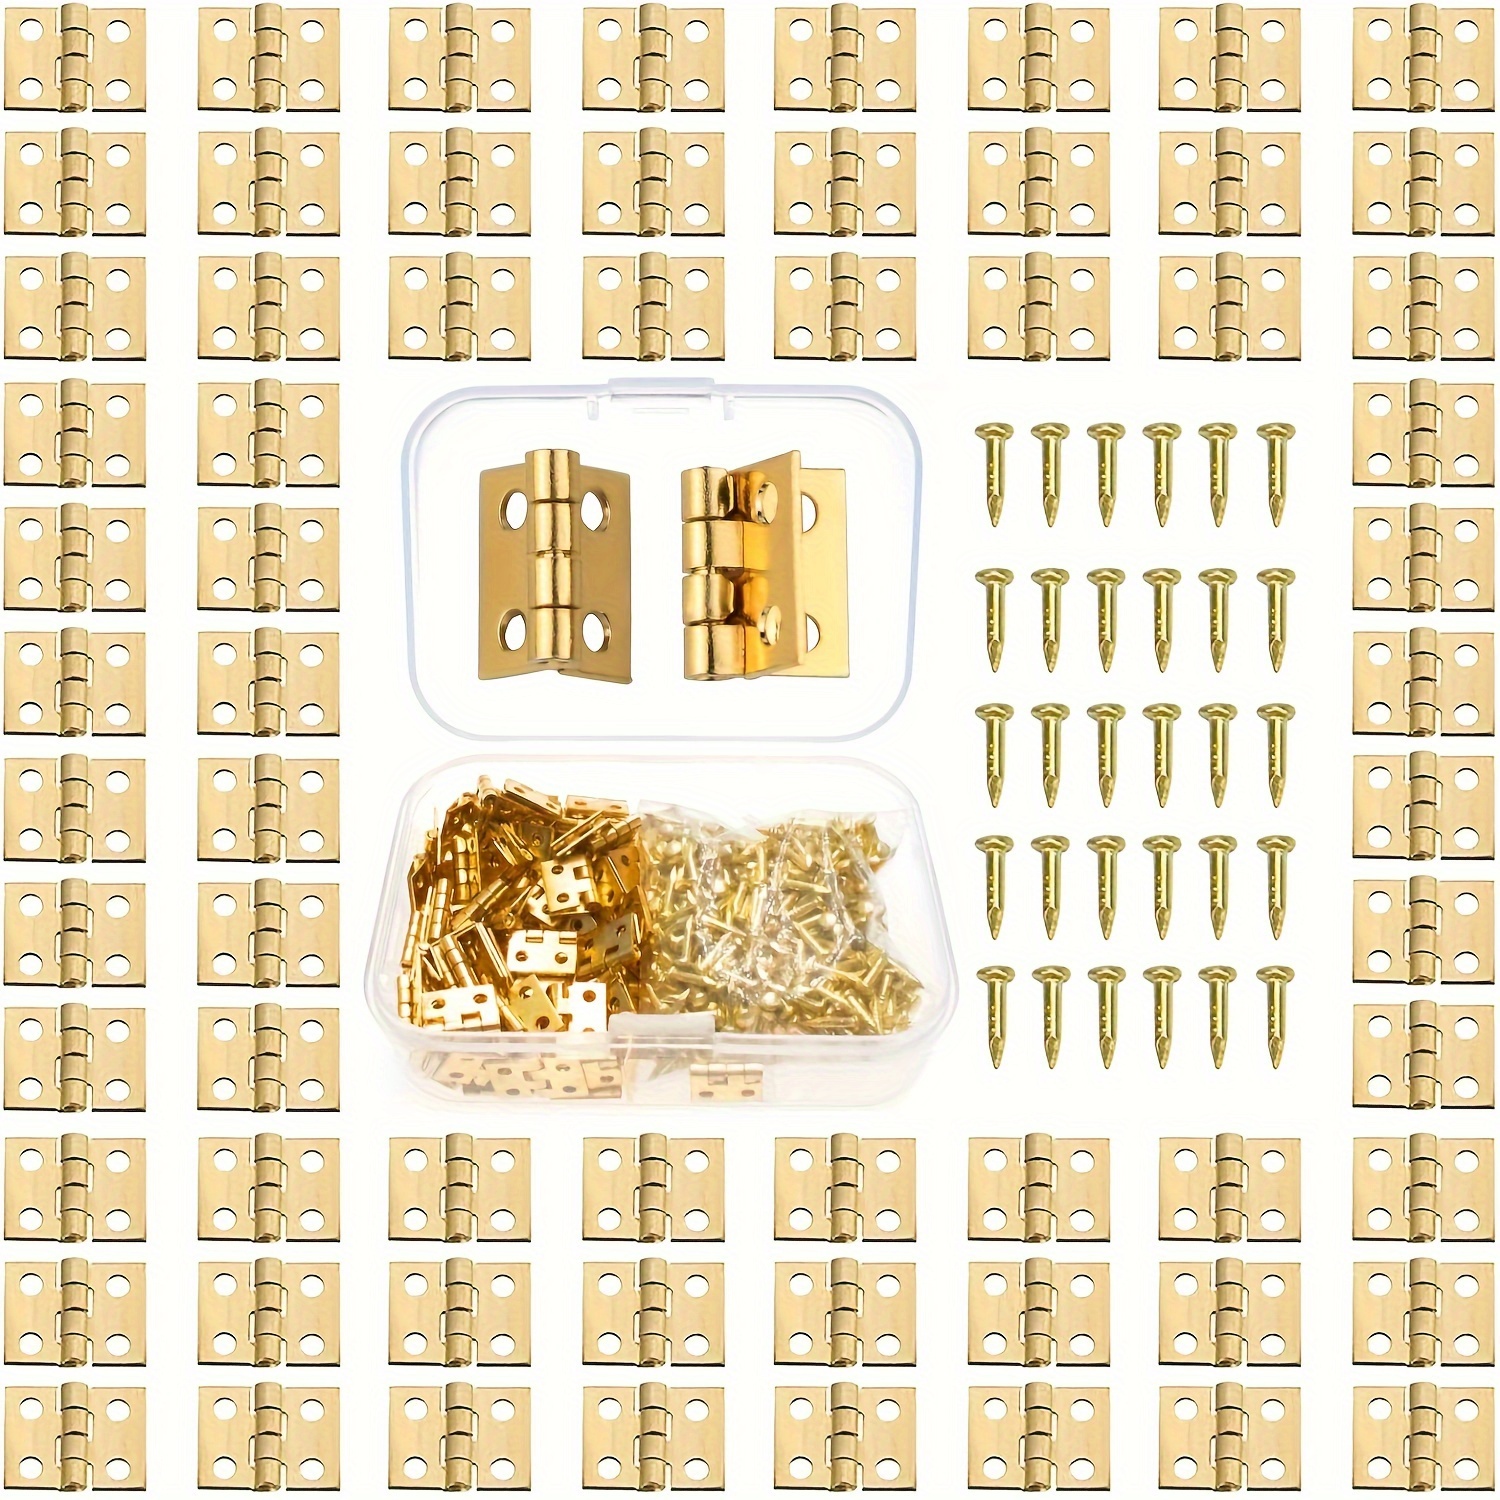 QINIZX 100pcs mini brass hinges hardware small tiny hinges for miniature  furniture wooden box jewelry chest box dollhouse cabinet di